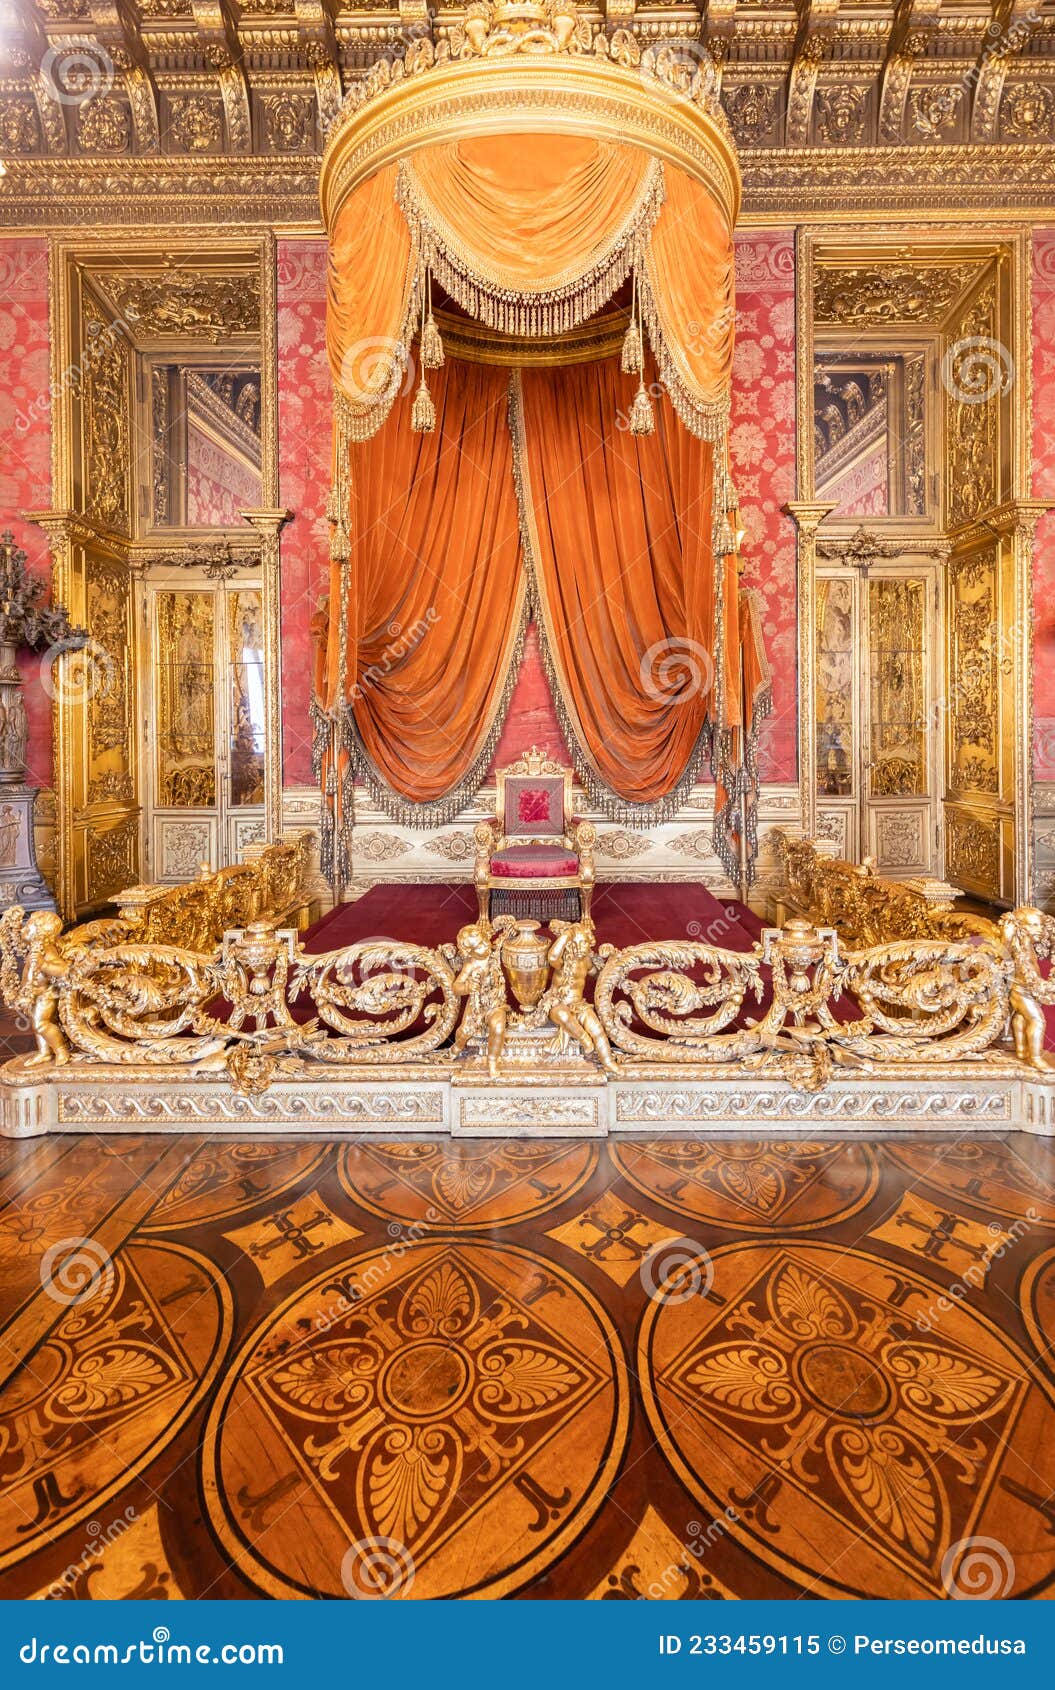 Old Throne Room Interior with Chair in Luxury Palace. Red and Gold Antique  Baroque Style Editorial Image - Image of room, architecture: 233459115